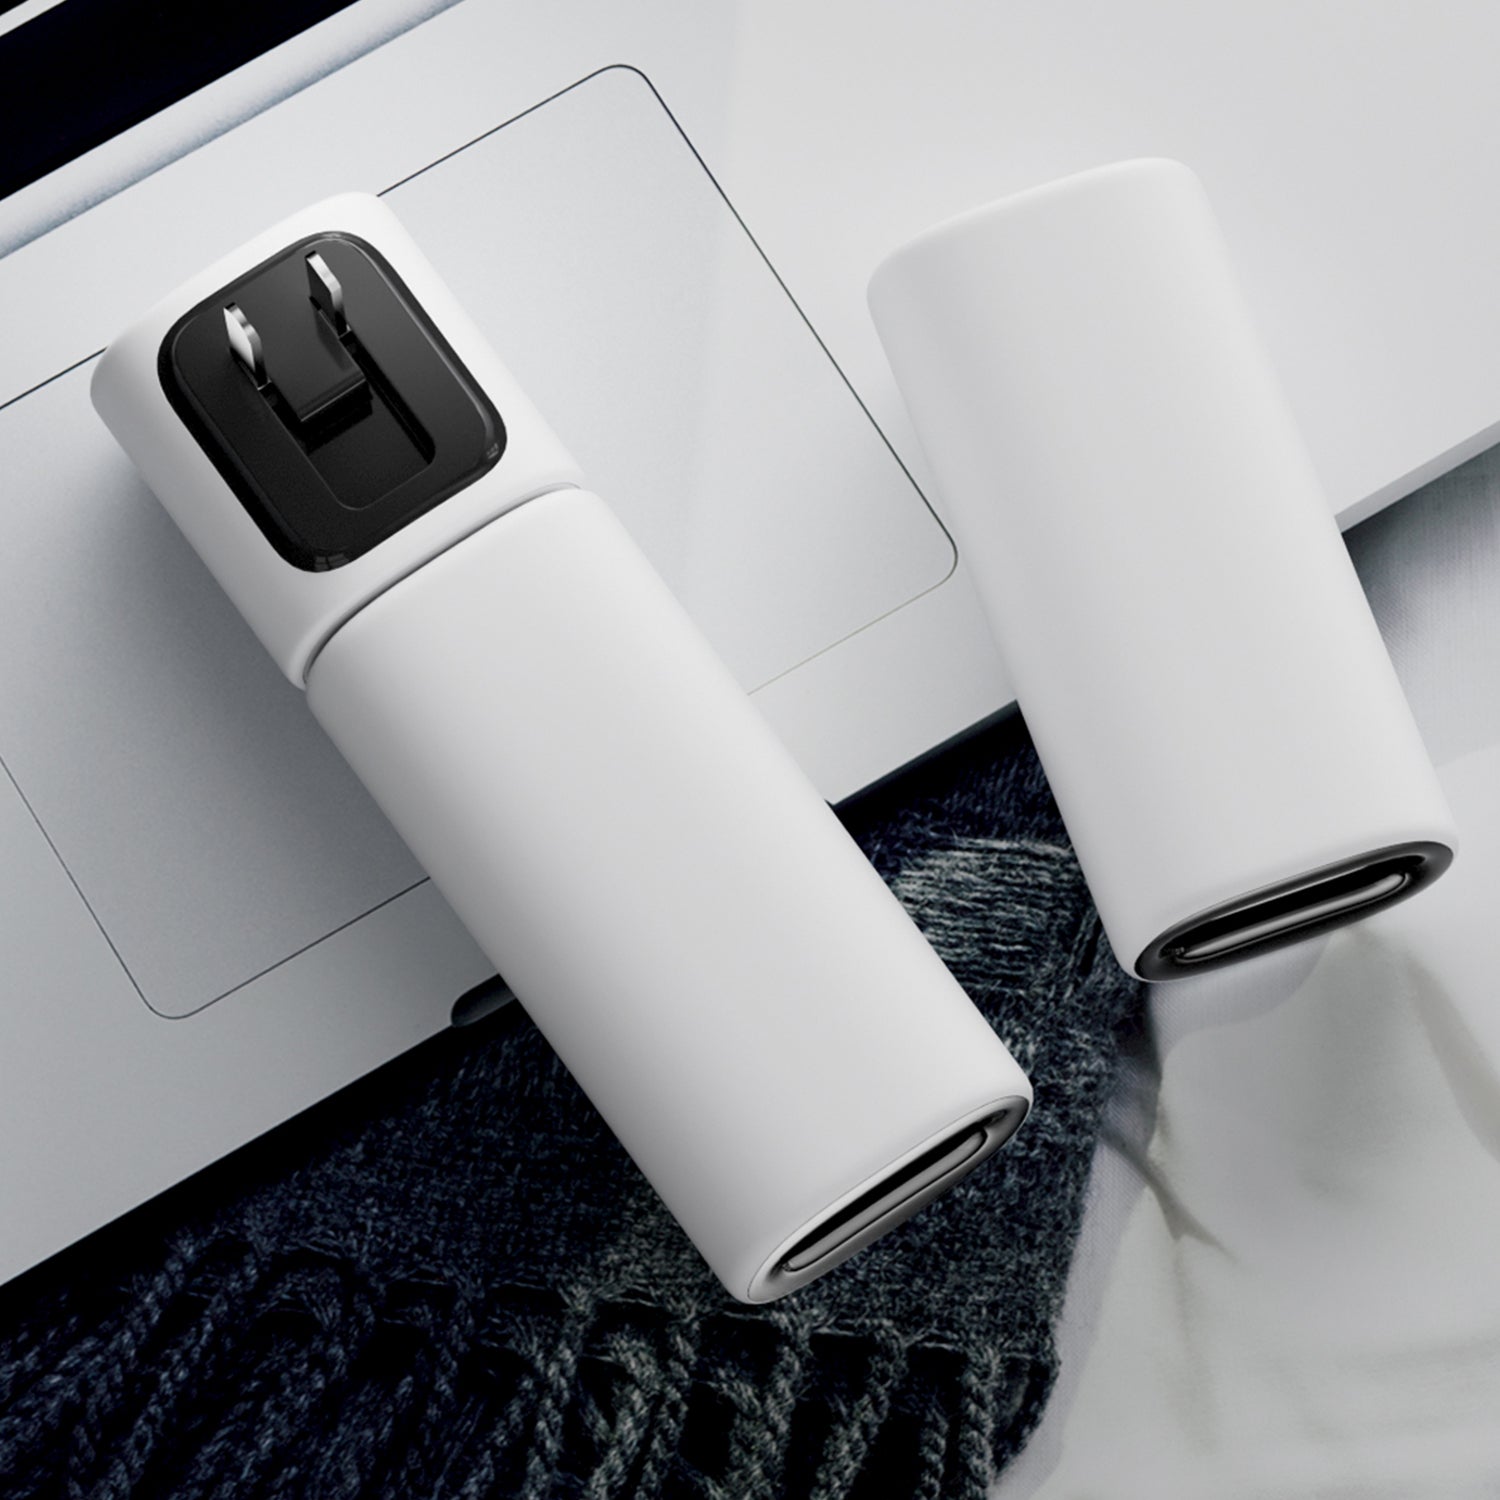 iSwift JuicePi 2-in-1 hybrid power bank charger